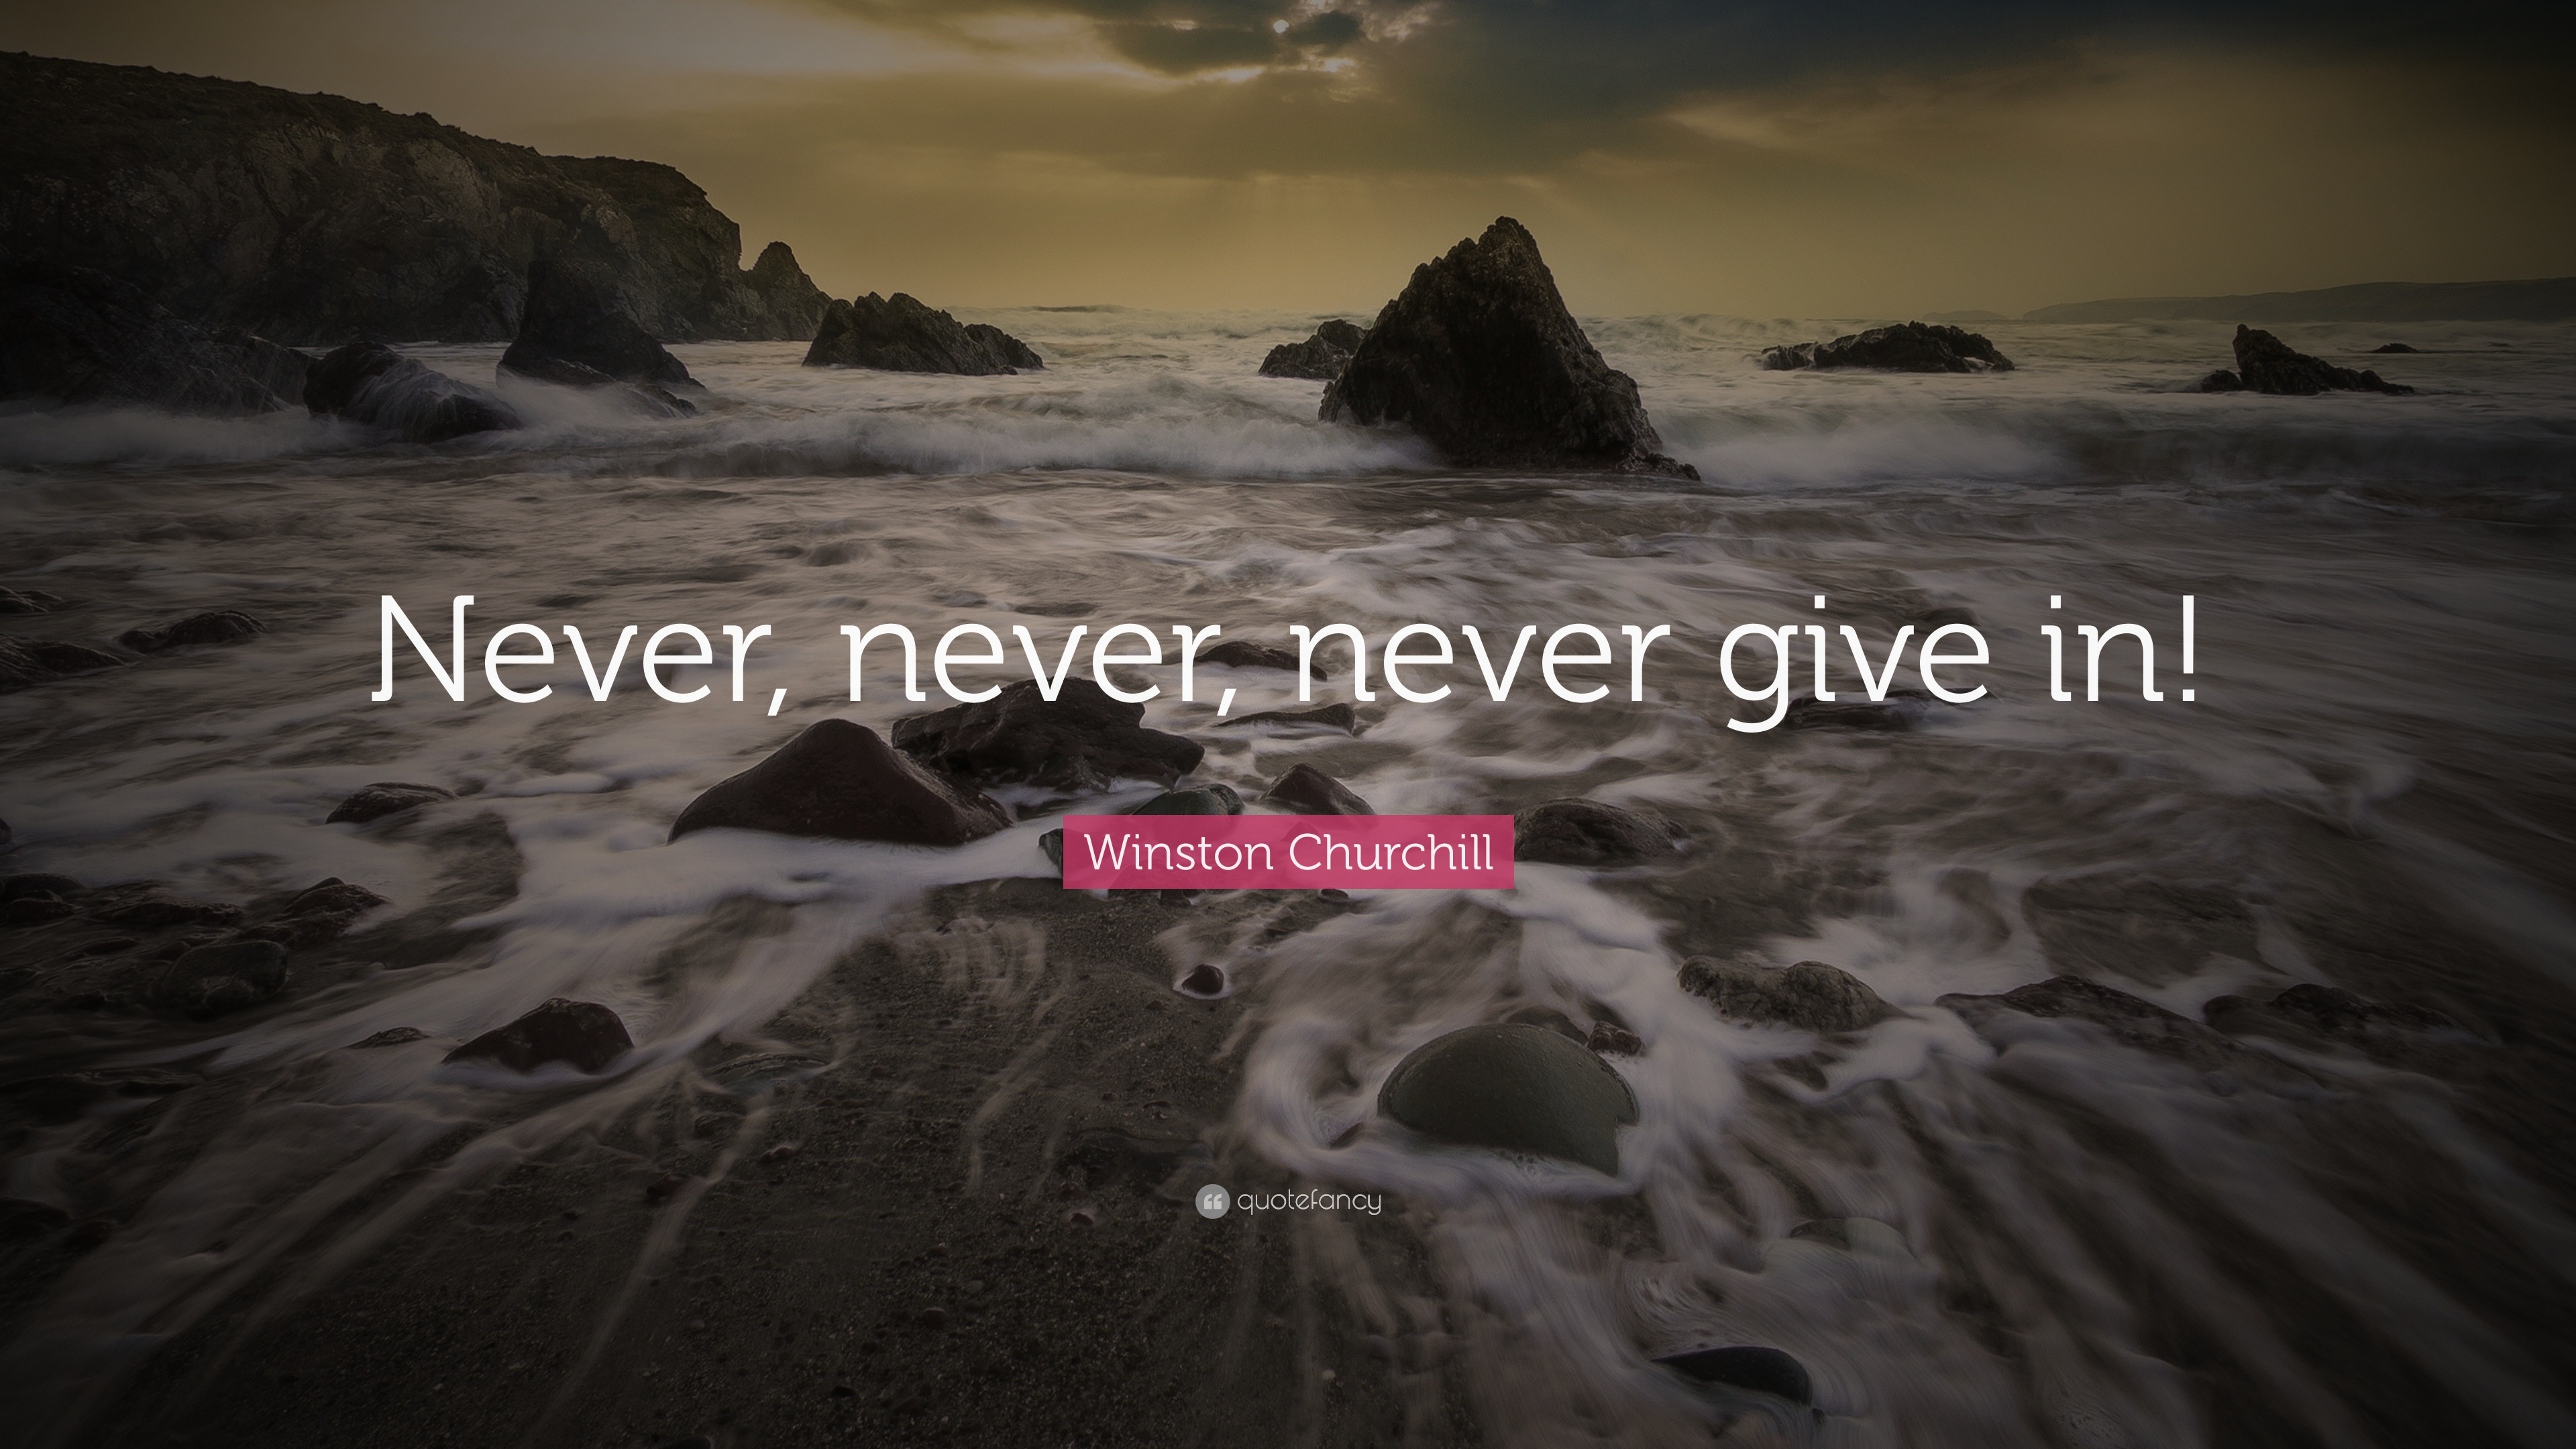 Top 500 Winston Churchill Quotes (2023 Update) - Quotefancy